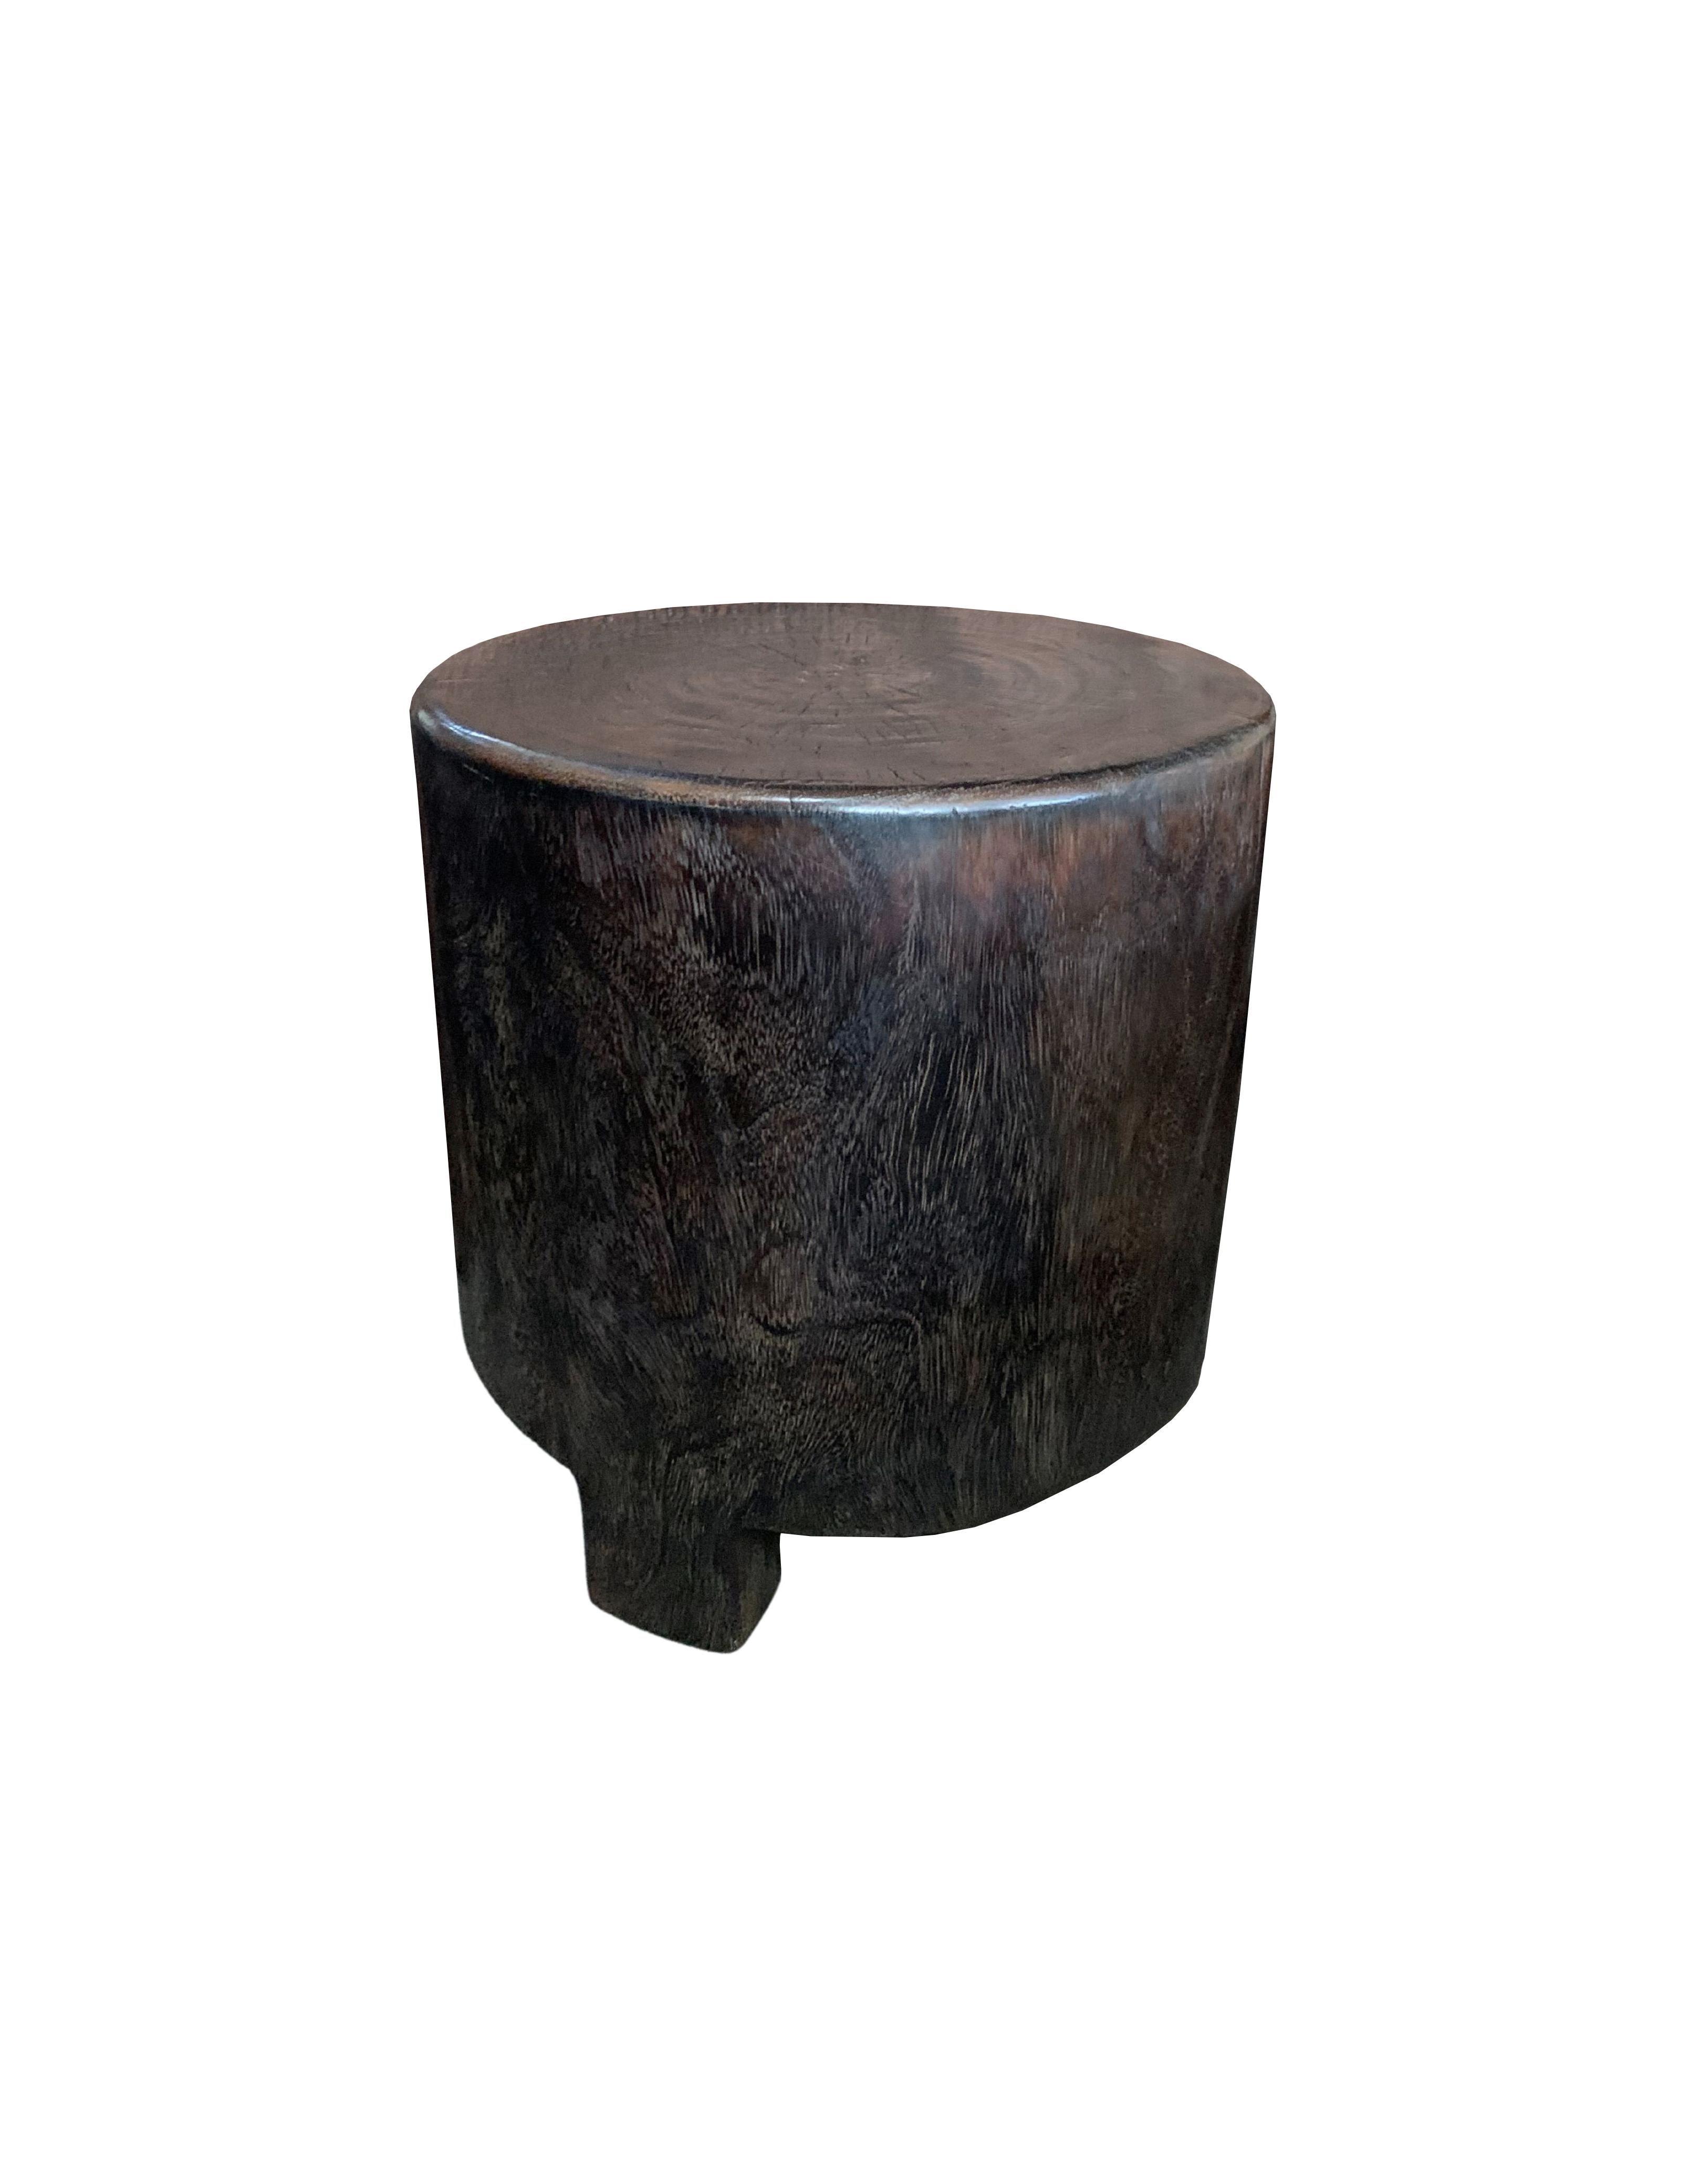 A wonderfully sculptural round side table. Its neutral pigments make it perfect for any space. A uniquely sculptural and versatile piece certain to invoke conversation. It was crafted from a solid block of suar wood and has a smooth texture finish.